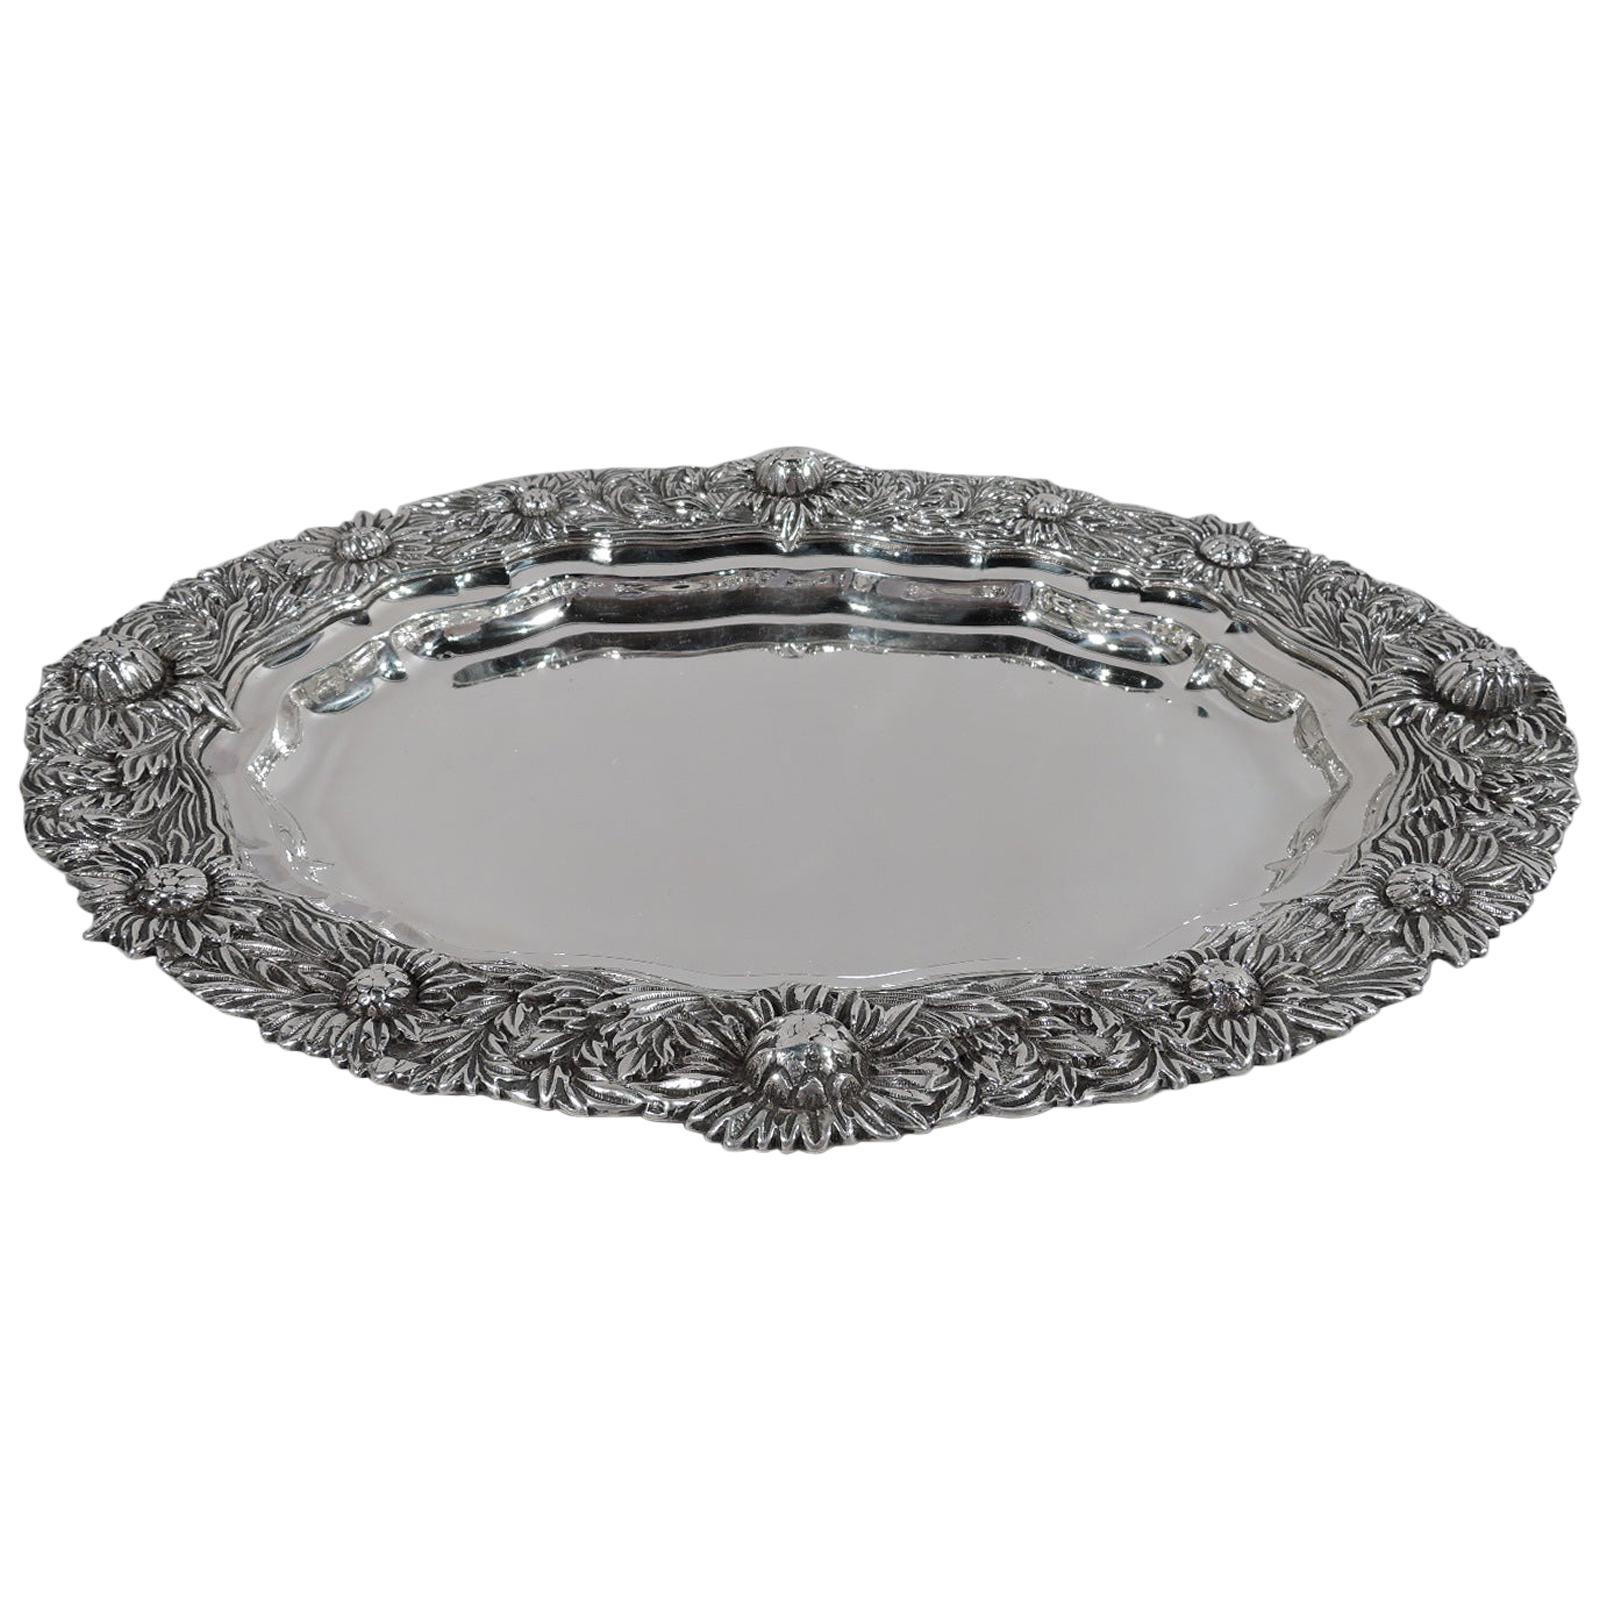 Tiffany Sterling Silver Serving Platter Tray in Desirable Chrysanthemum